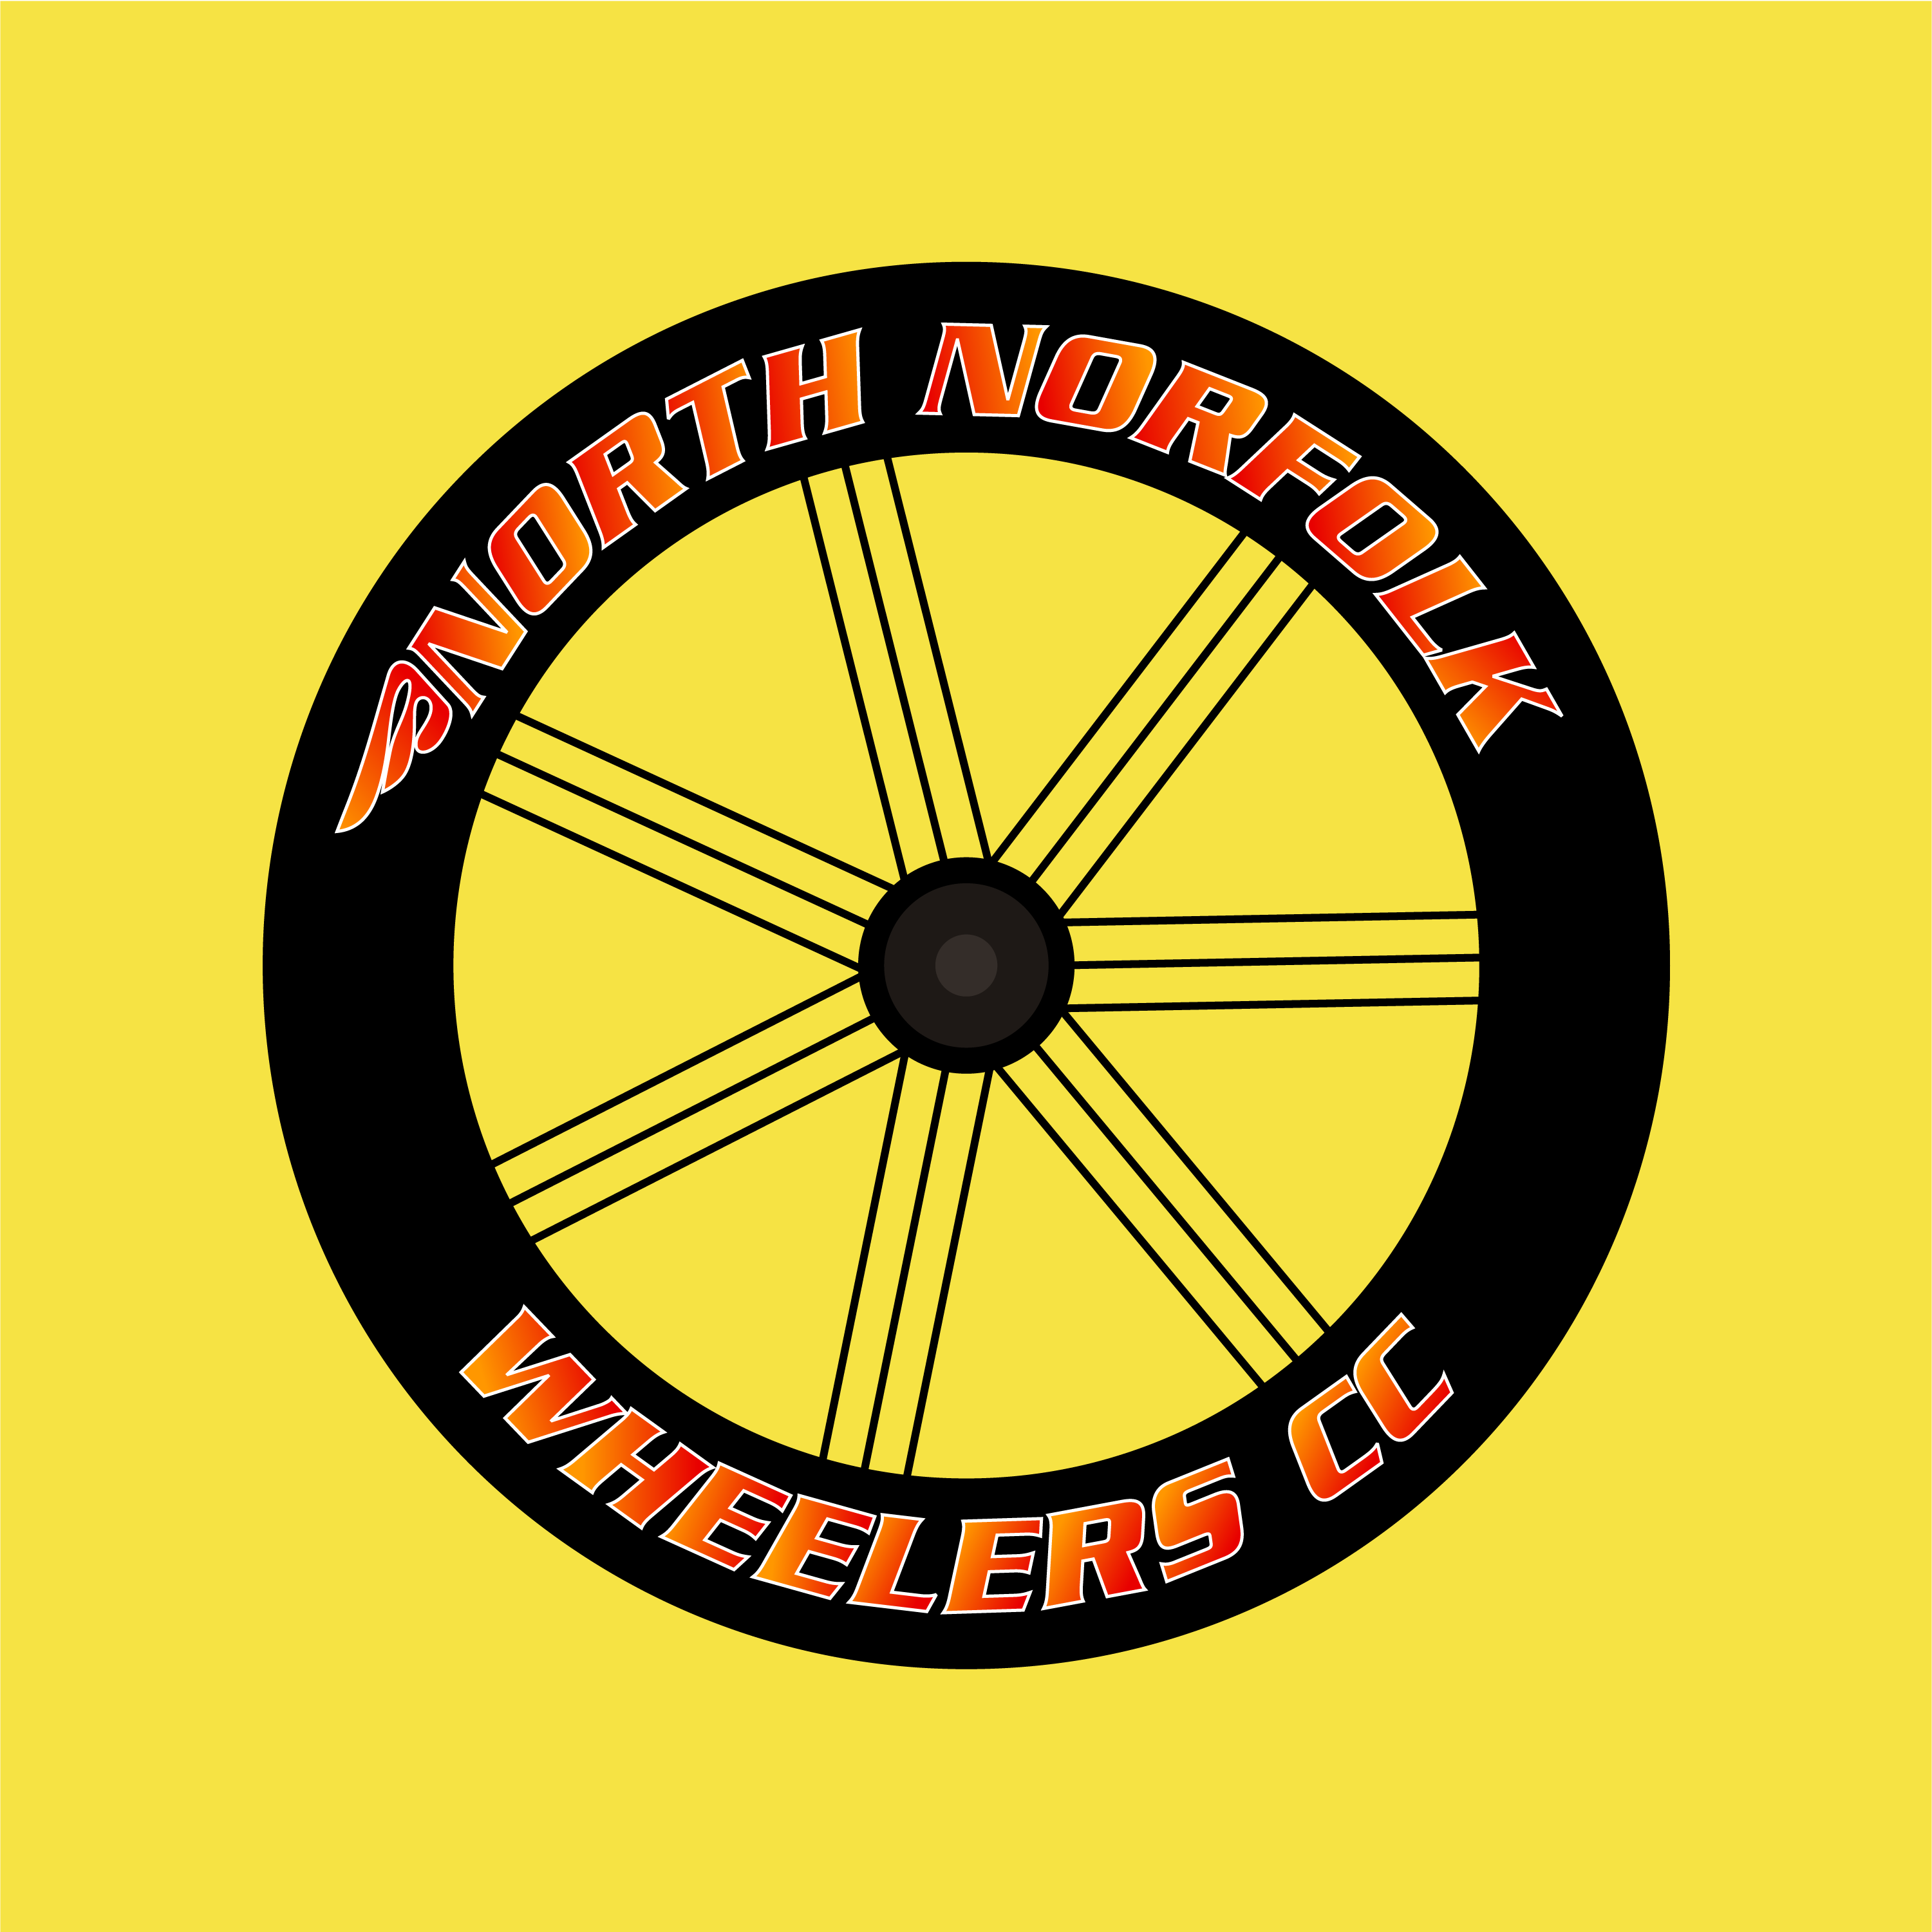 Club Image for NORTH NORFOLK WHEELERS